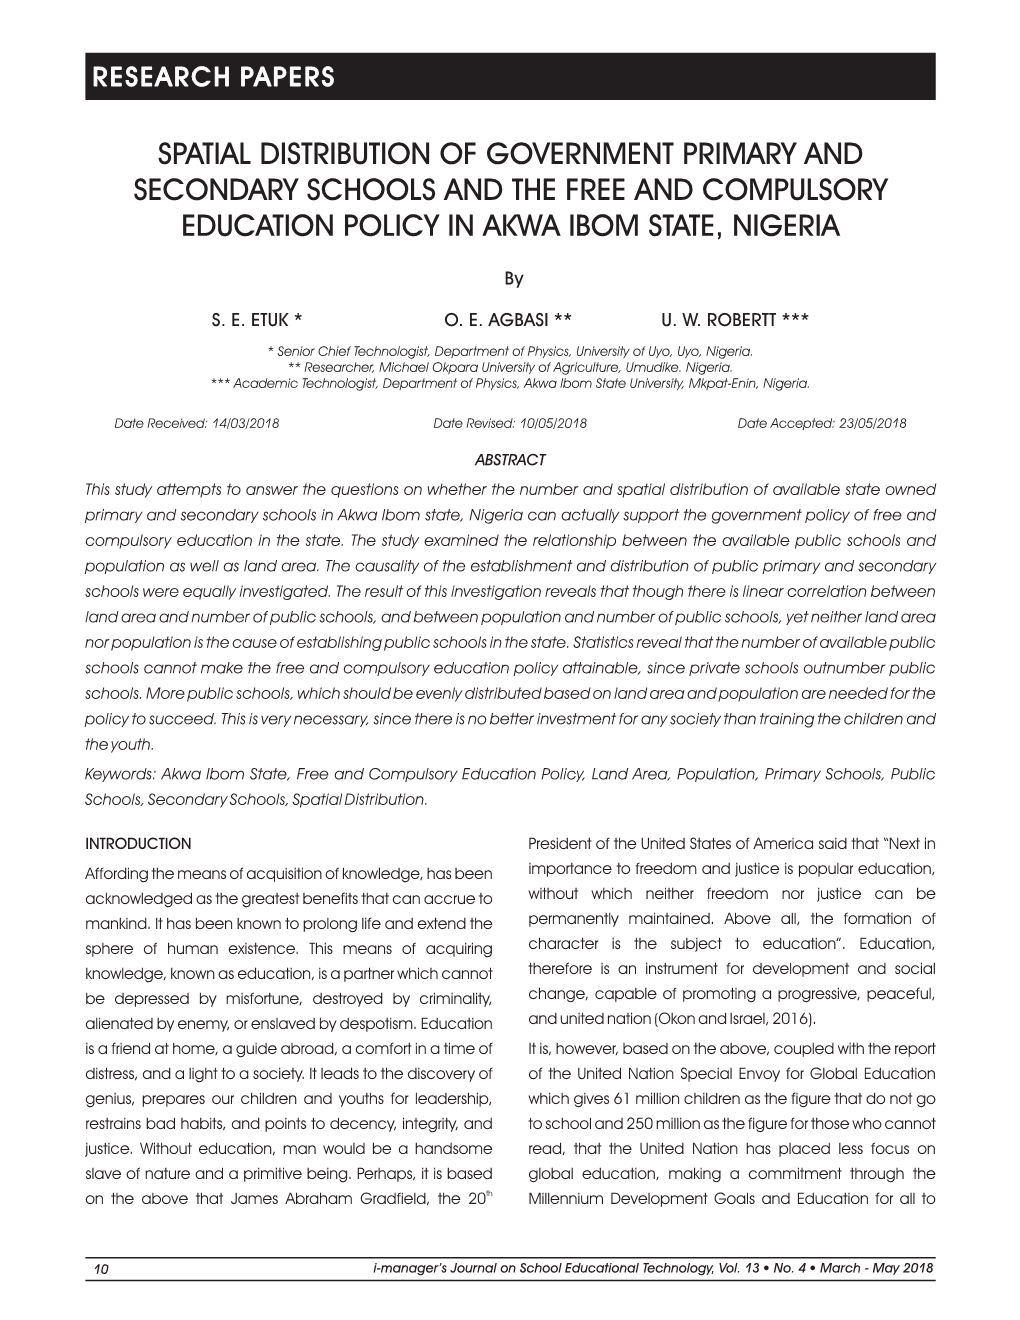 Spatial Distribution of Government Primary and Secondary Schools and the Free and Compulsory Education Policy in Akwa Ibom State, Nigeria